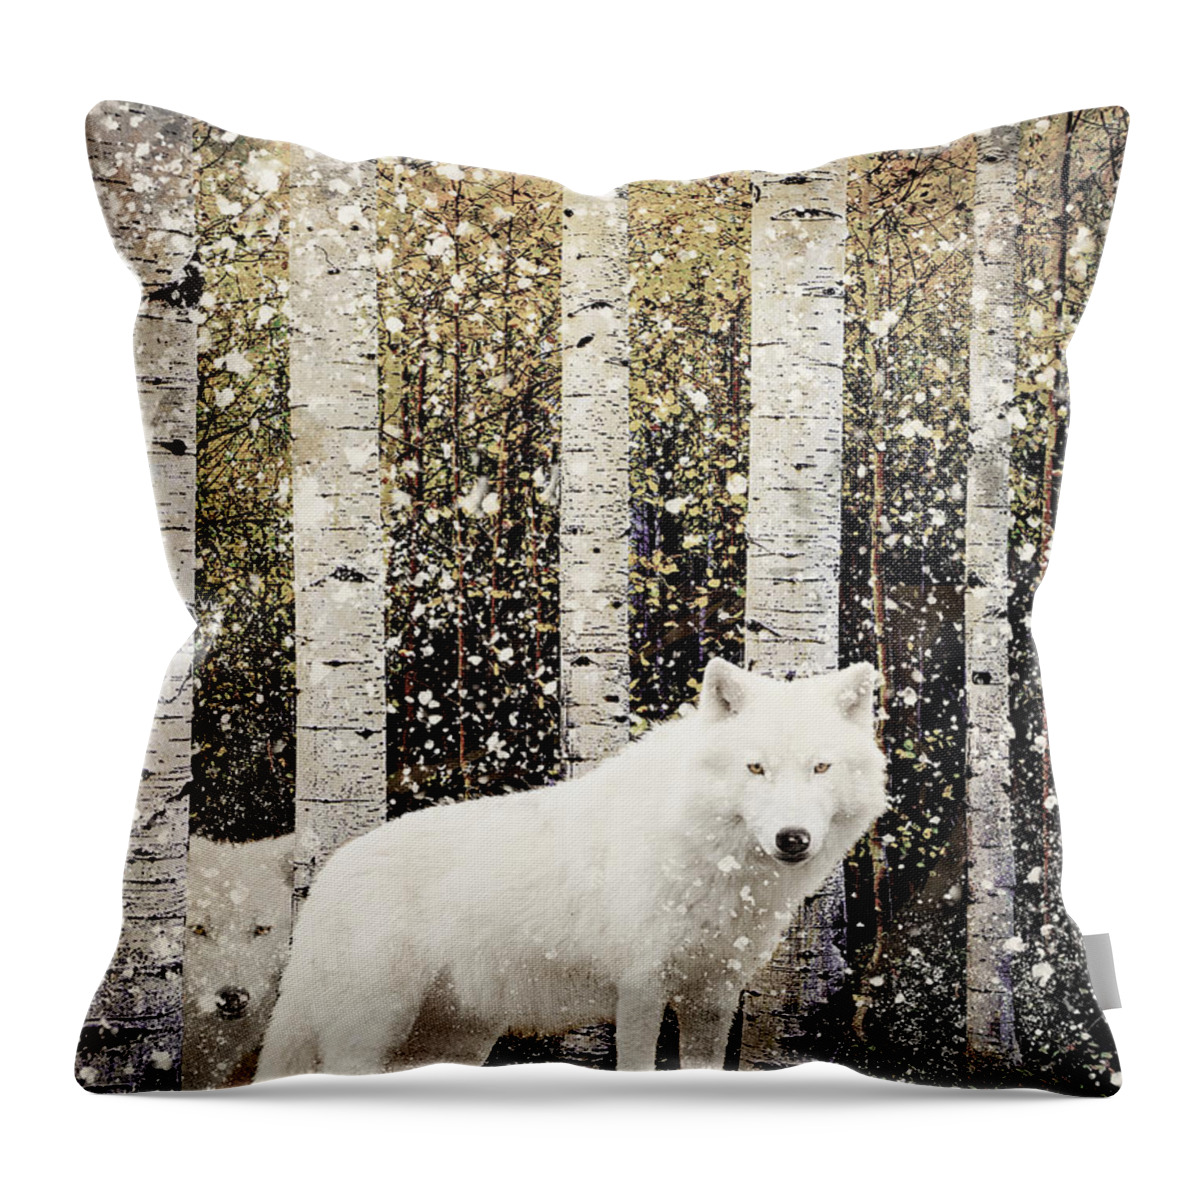 Wolves Throw Pillow featuring the digital art Winter Wolves by Sandra Selle Rodriguez